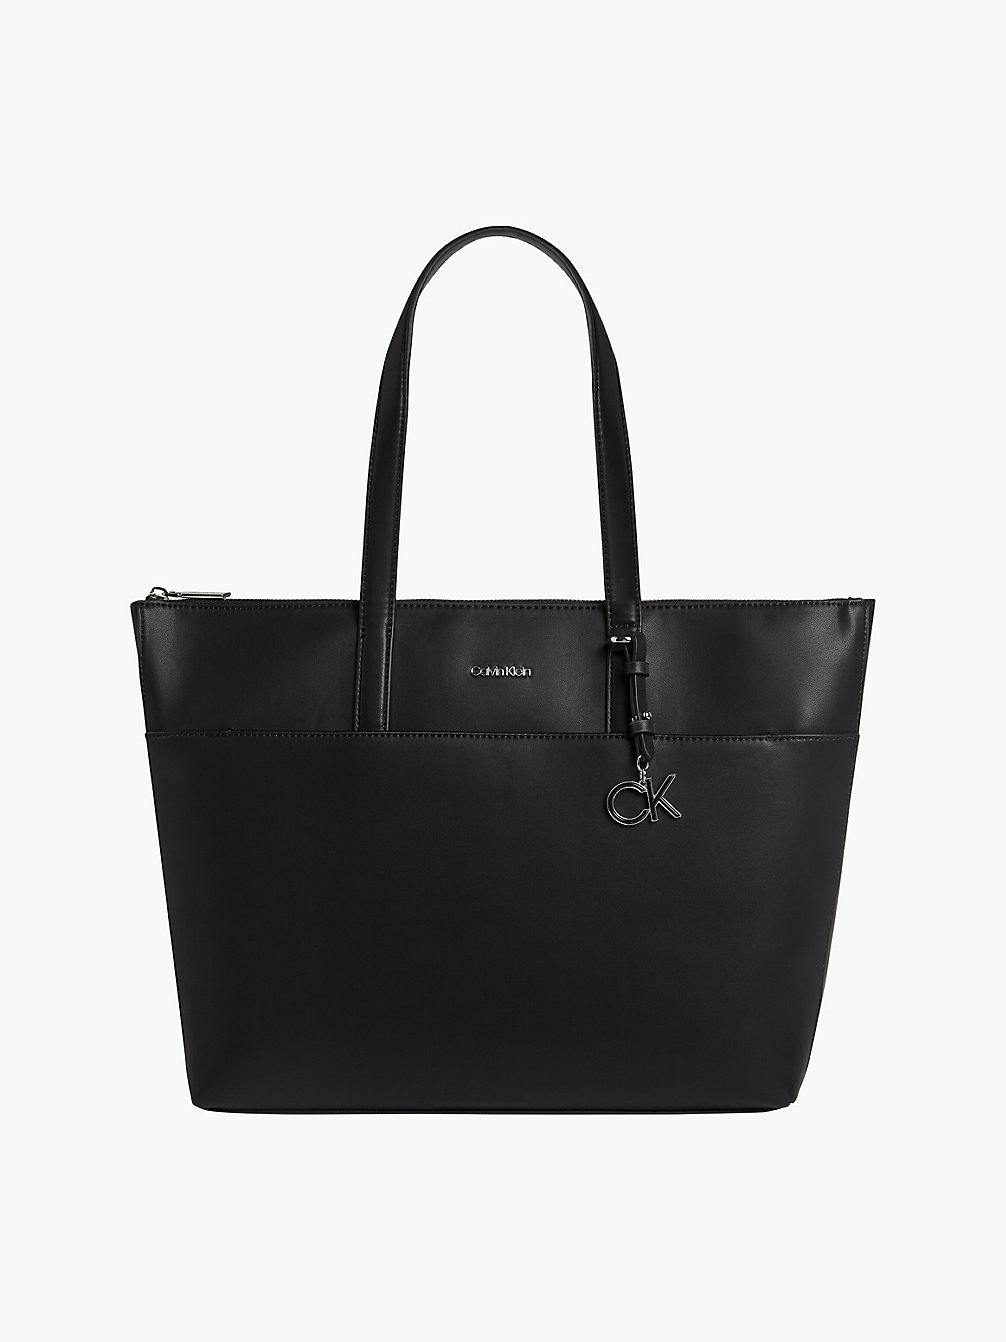 CK BLACK Large Recycled Tote Bag undefined women Calvin Klein